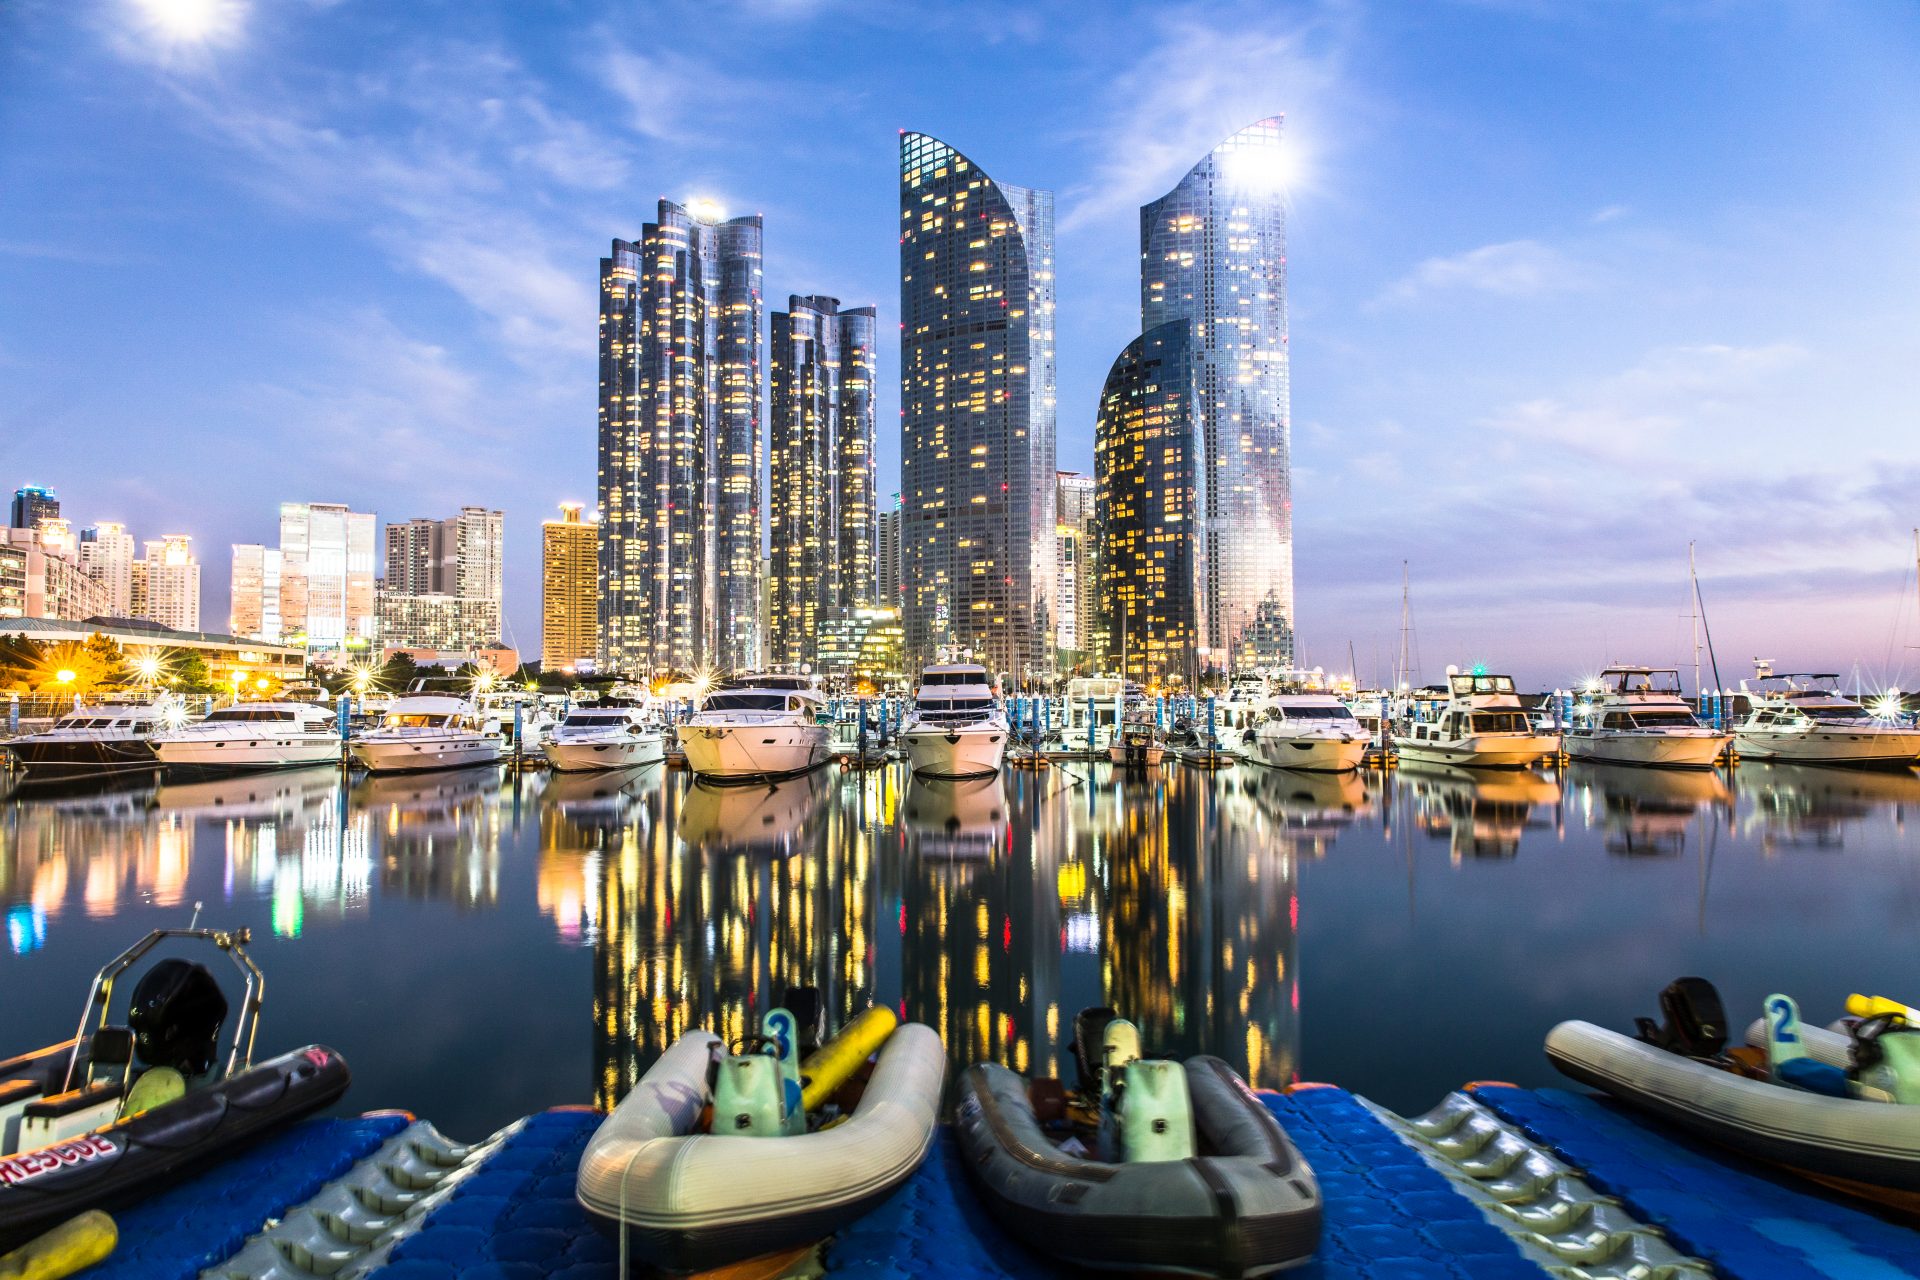 <p>Famous as a gourmet destination, Jagalchi, Korea's largest seafood market, is surrounded by many restaurants where you can enjoy fresh seafood. It is also famous for its romantic night view.</p>